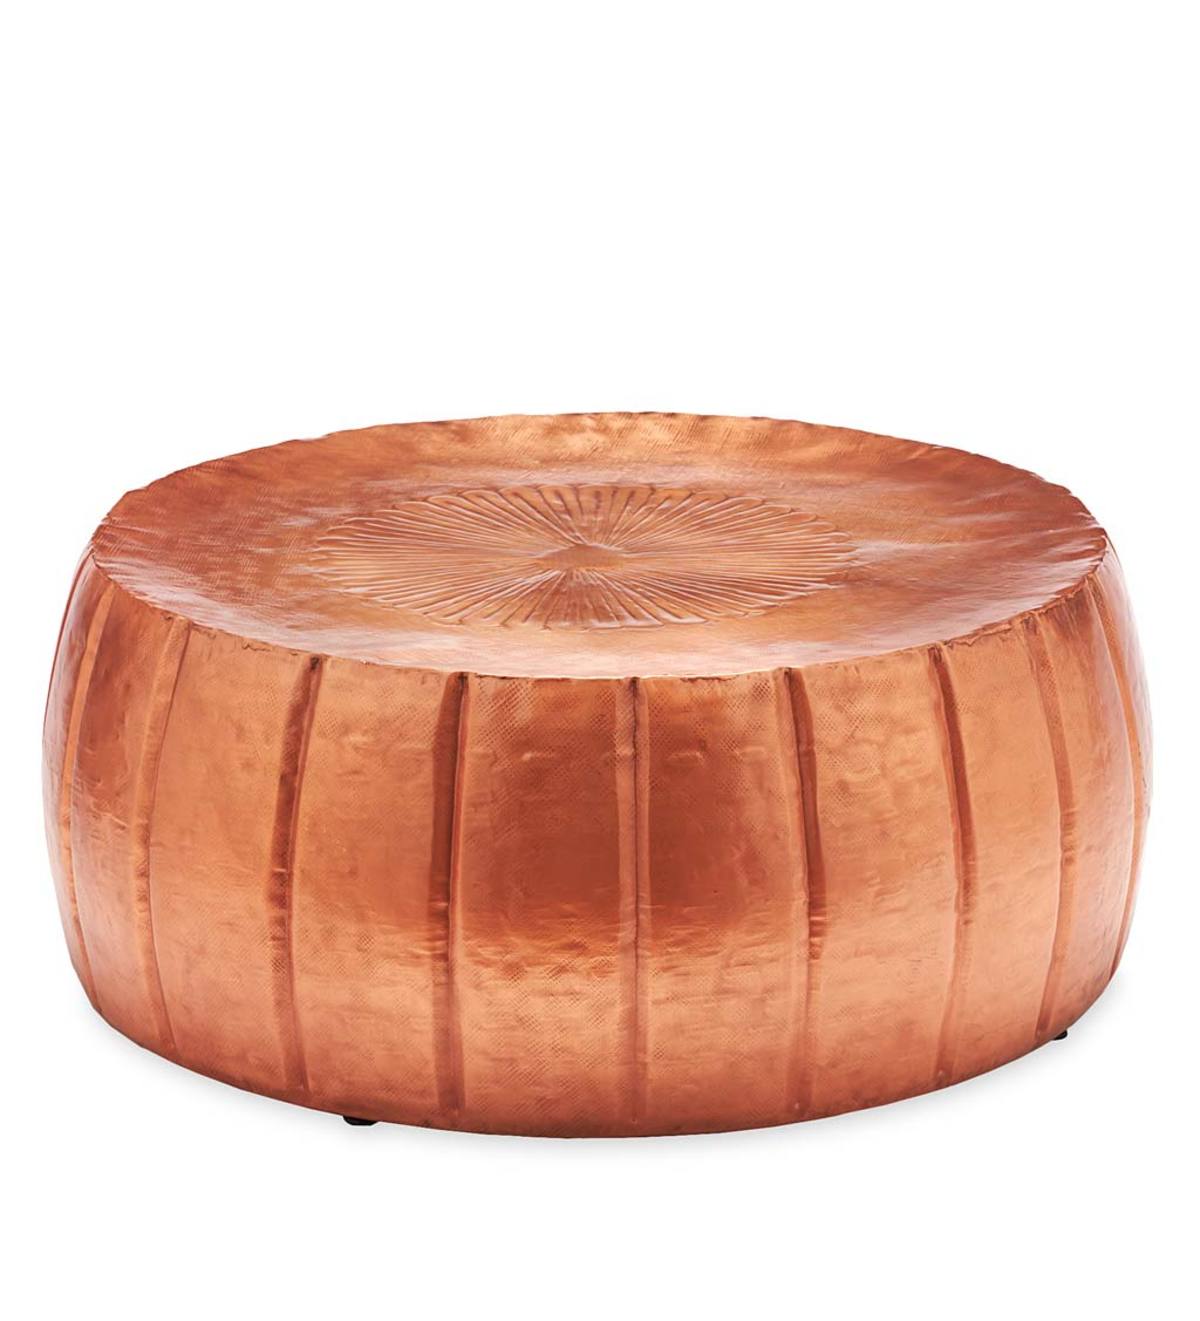 Hammered Drum Coffee Table - Copper